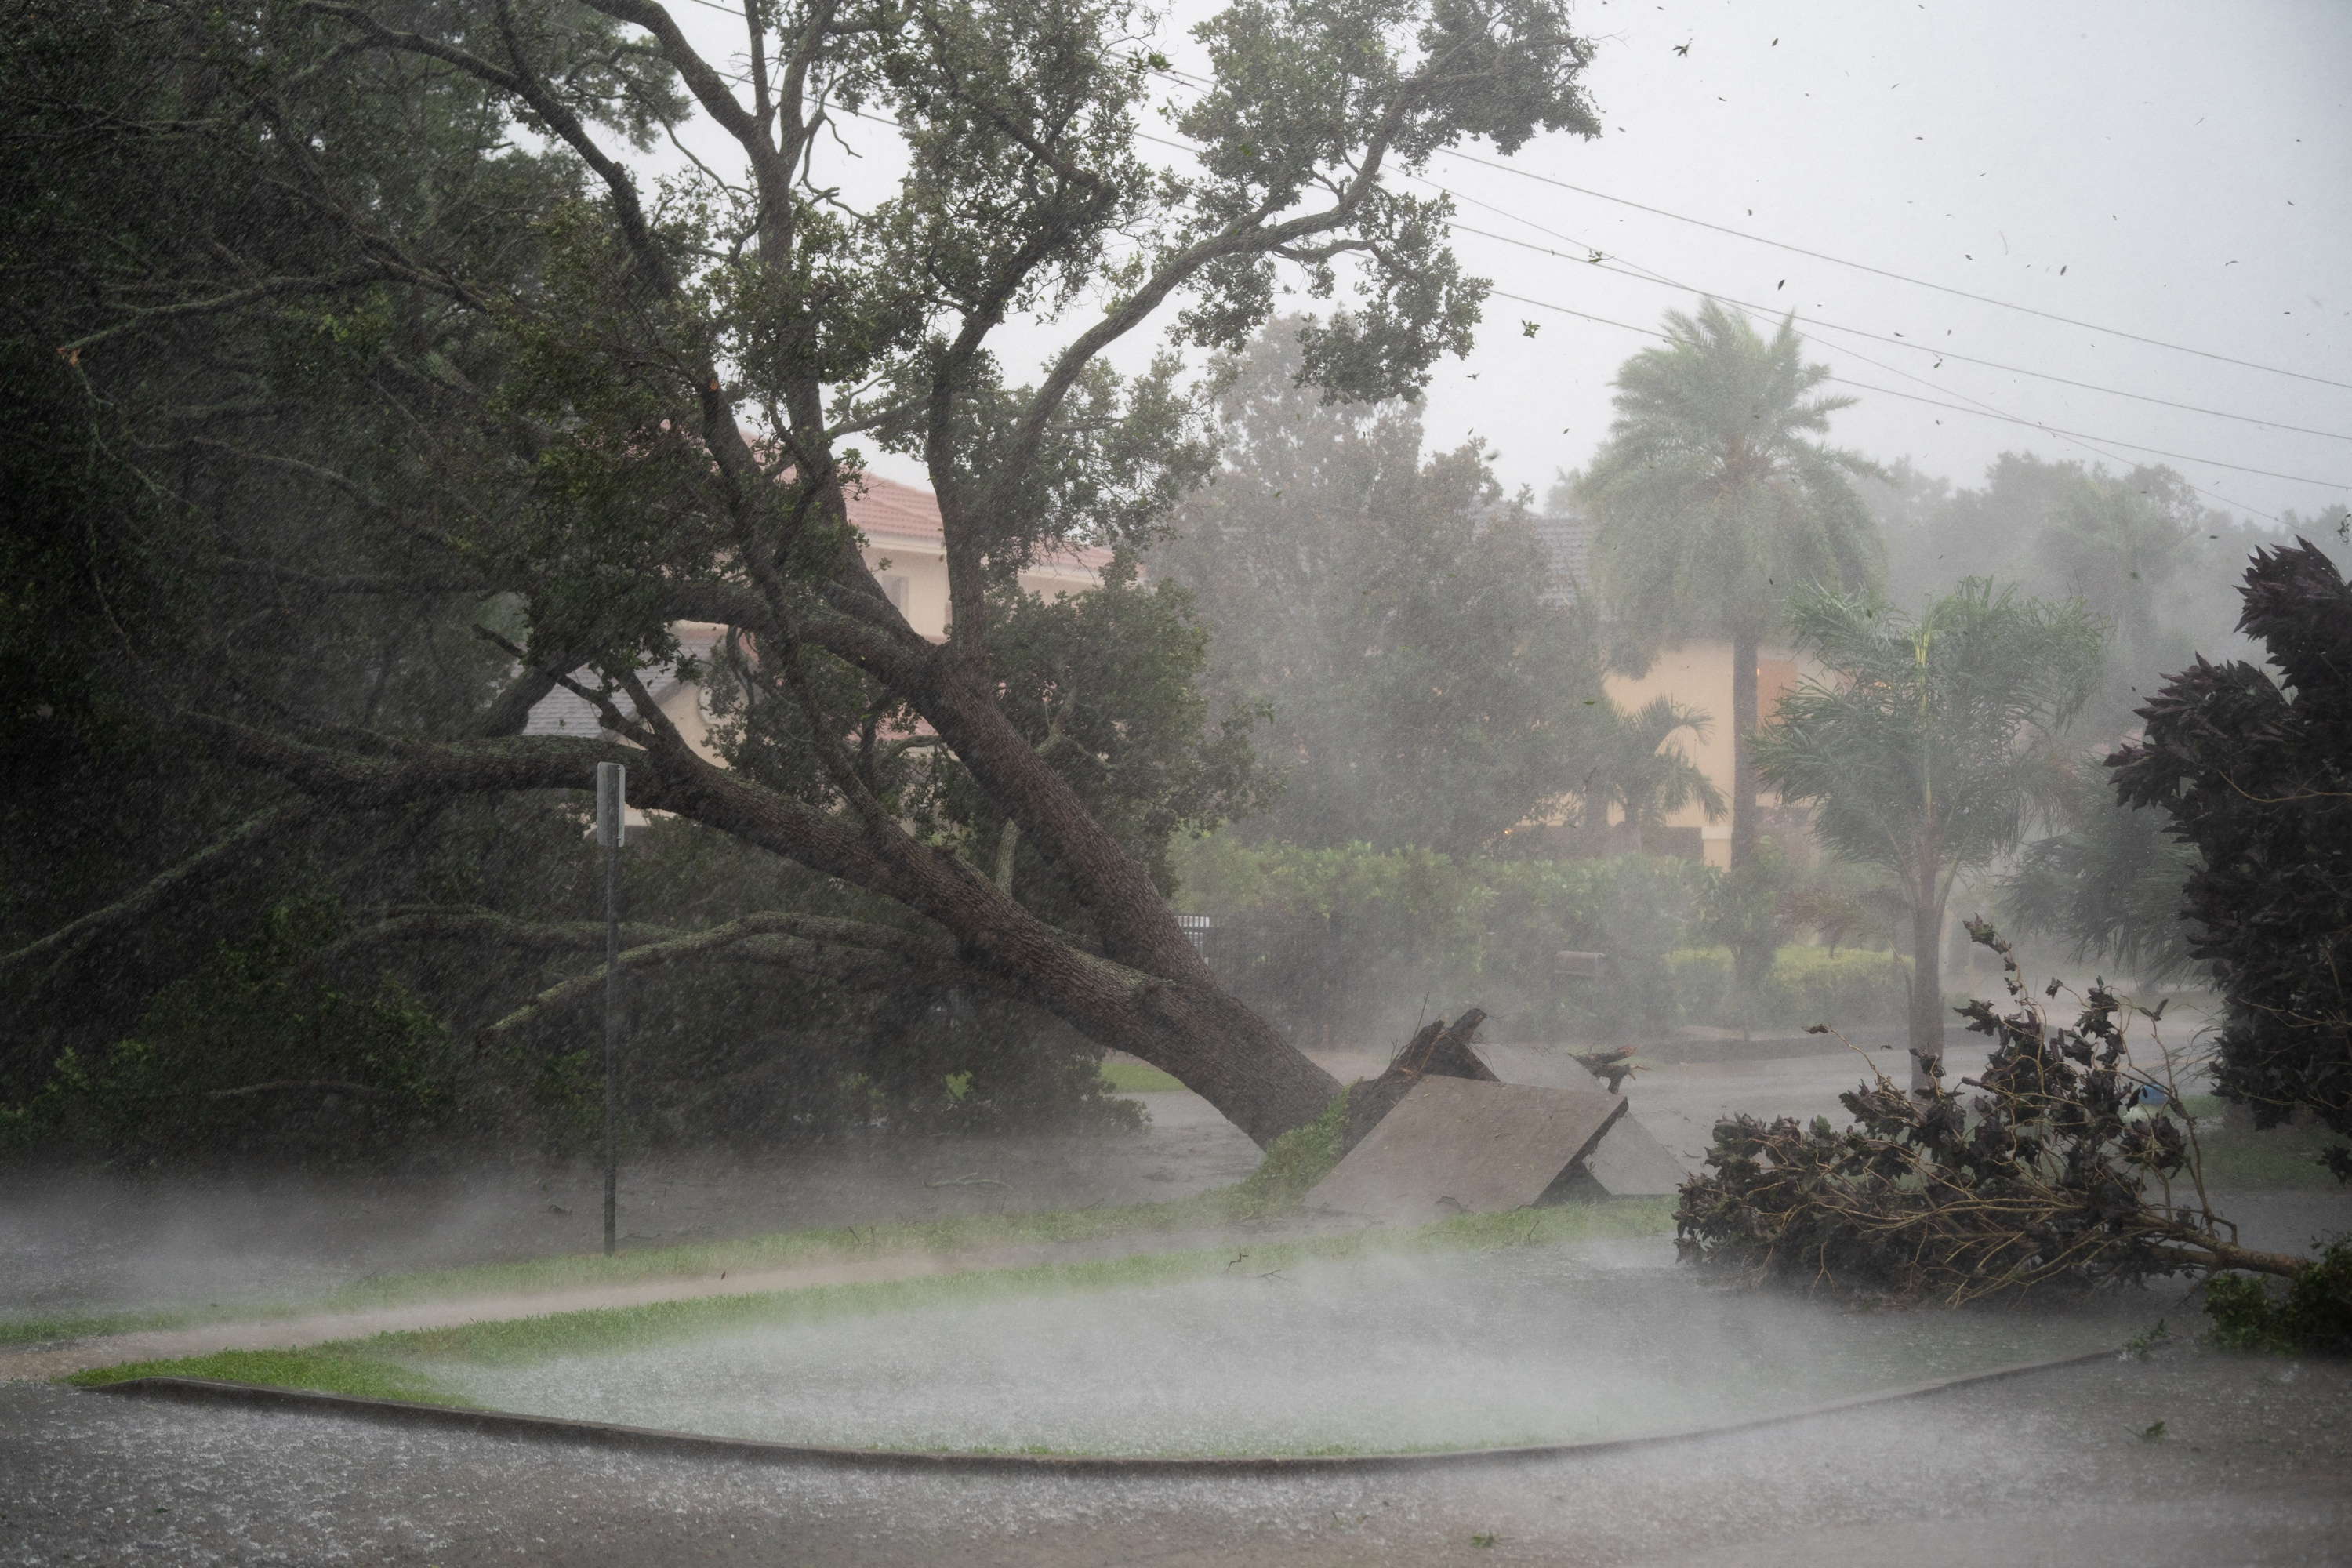 Hurricane Ian Cuba without electricity after power grid failures